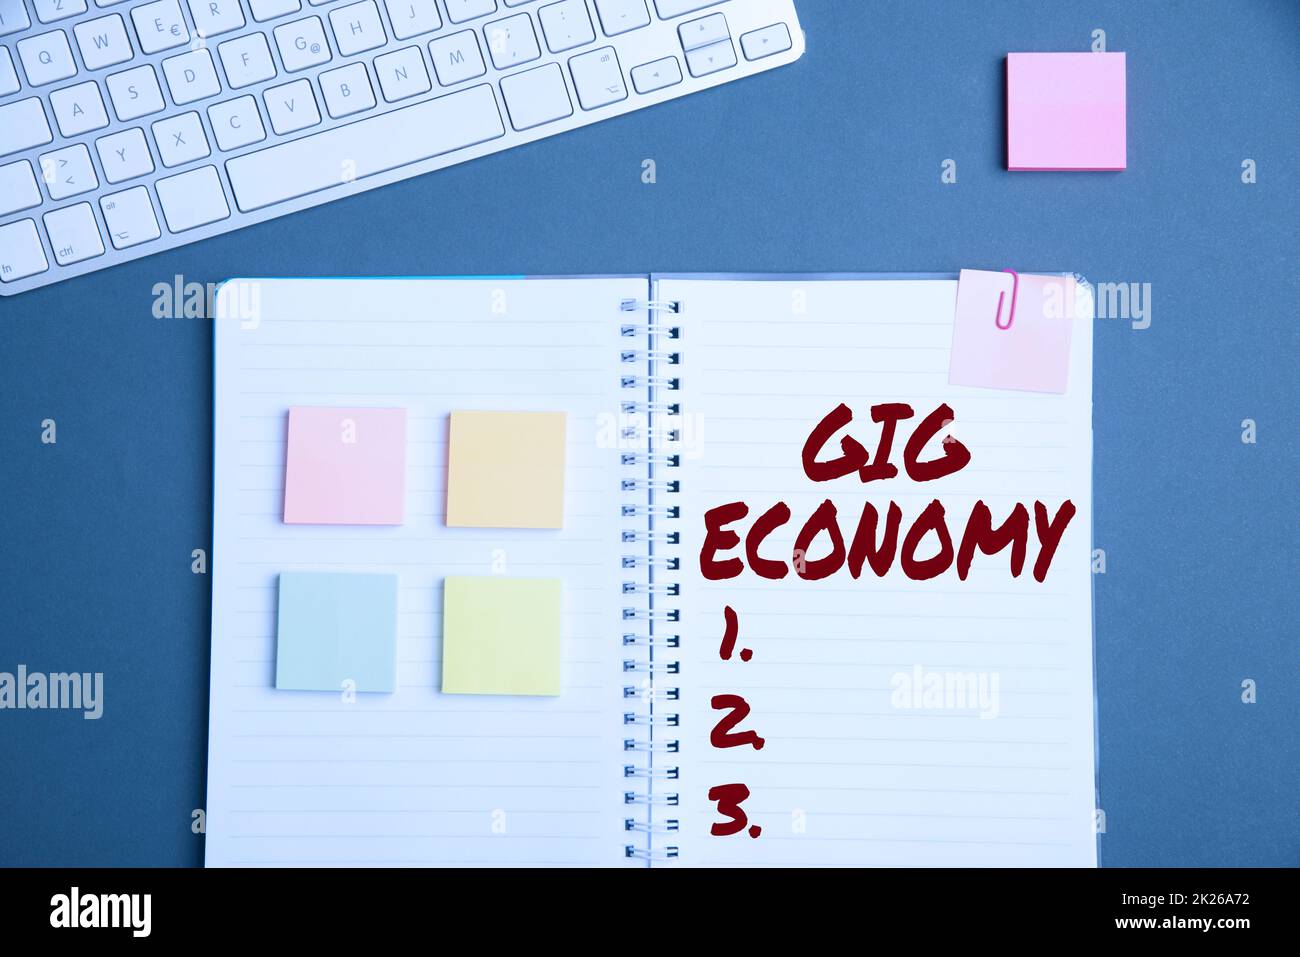 Text caption presenting Gig Economy. Business overview a market system distinguished by shortterm jobs and contracts Keyboard Over A Table Beside A Notebook And Pens With Sticky Notes Stock Photo